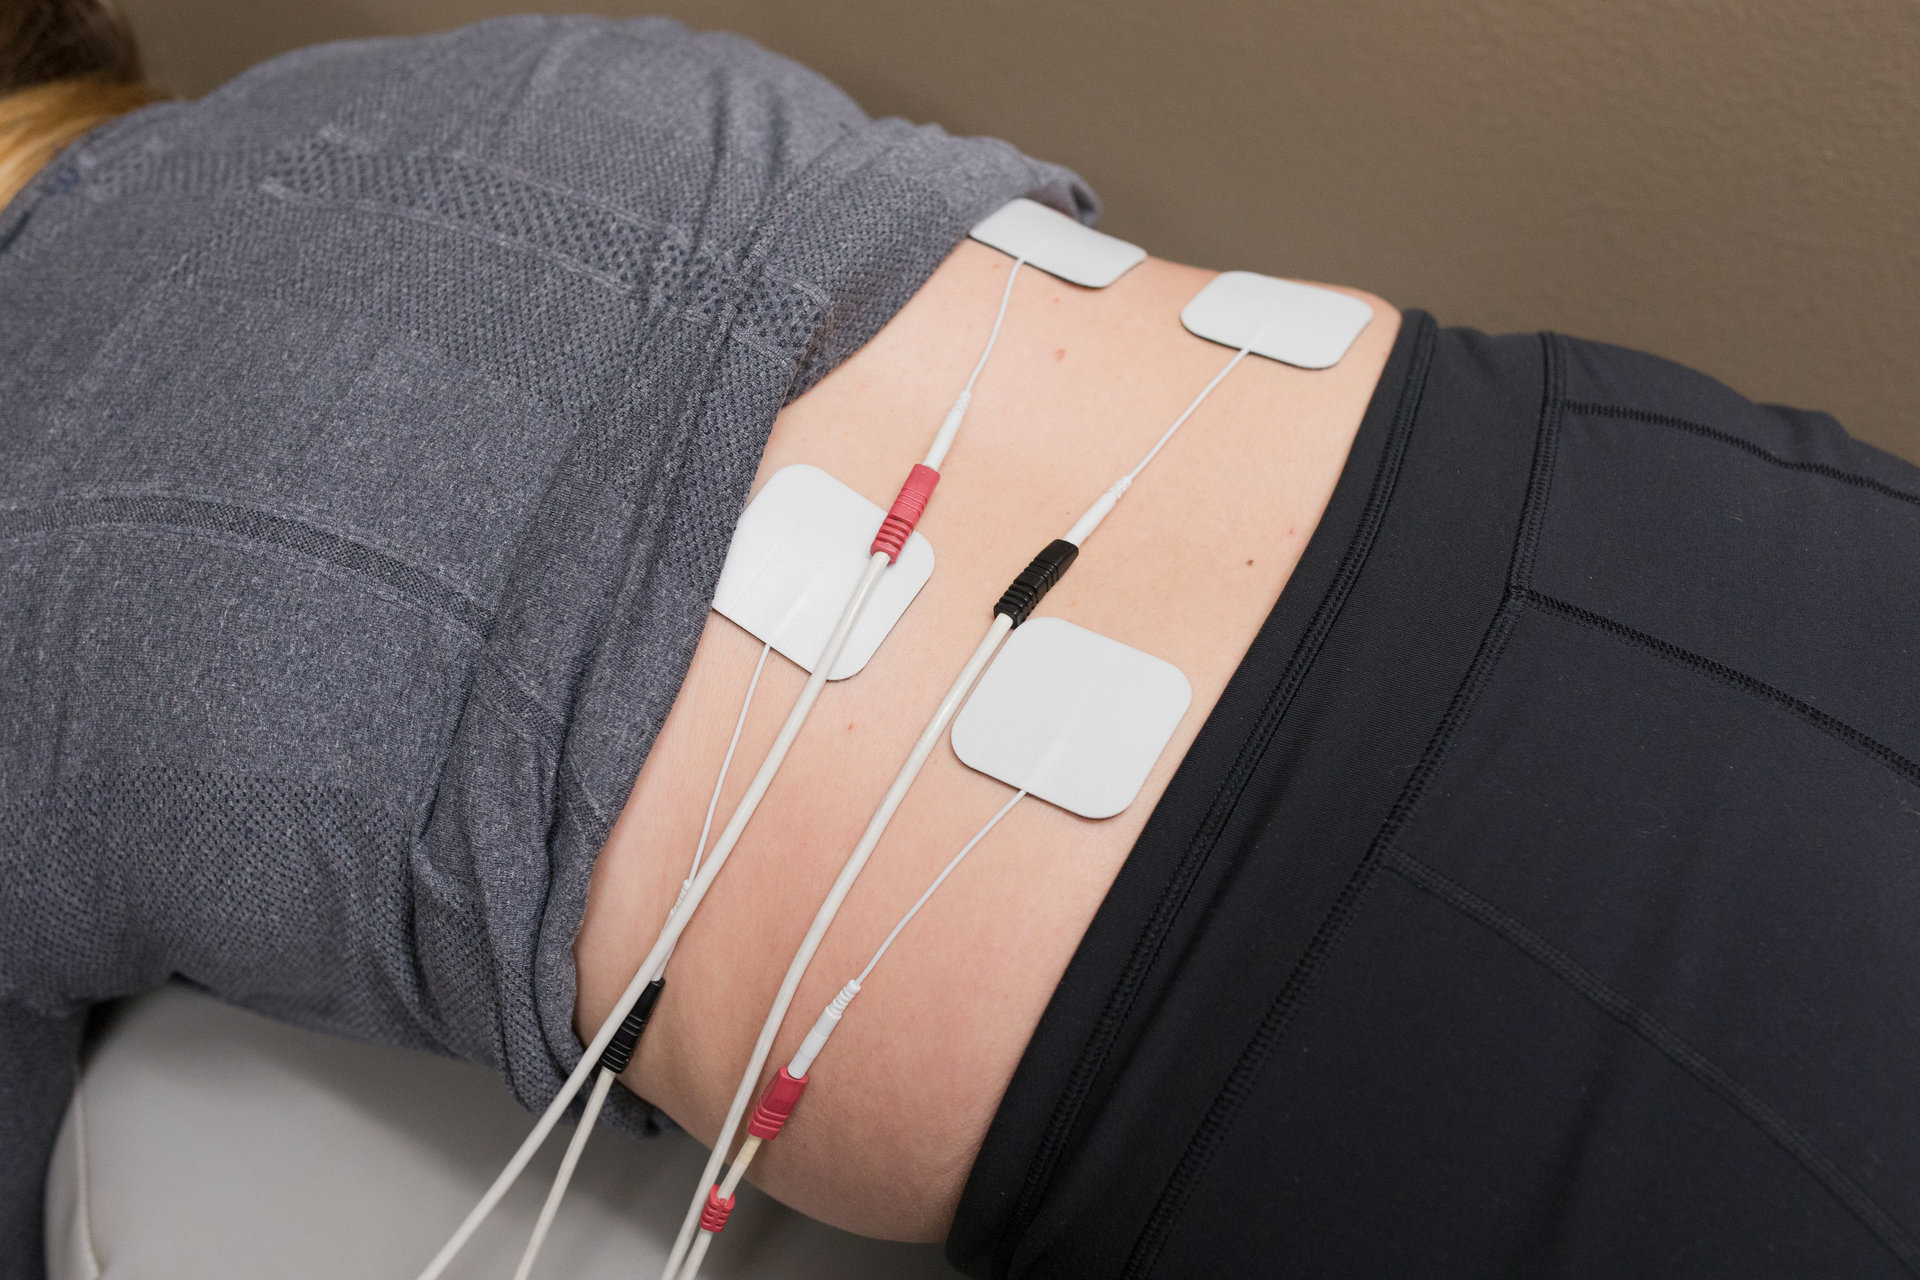 Electrical Muscle Stimulation in Hoover - My Chiropractor Hoover